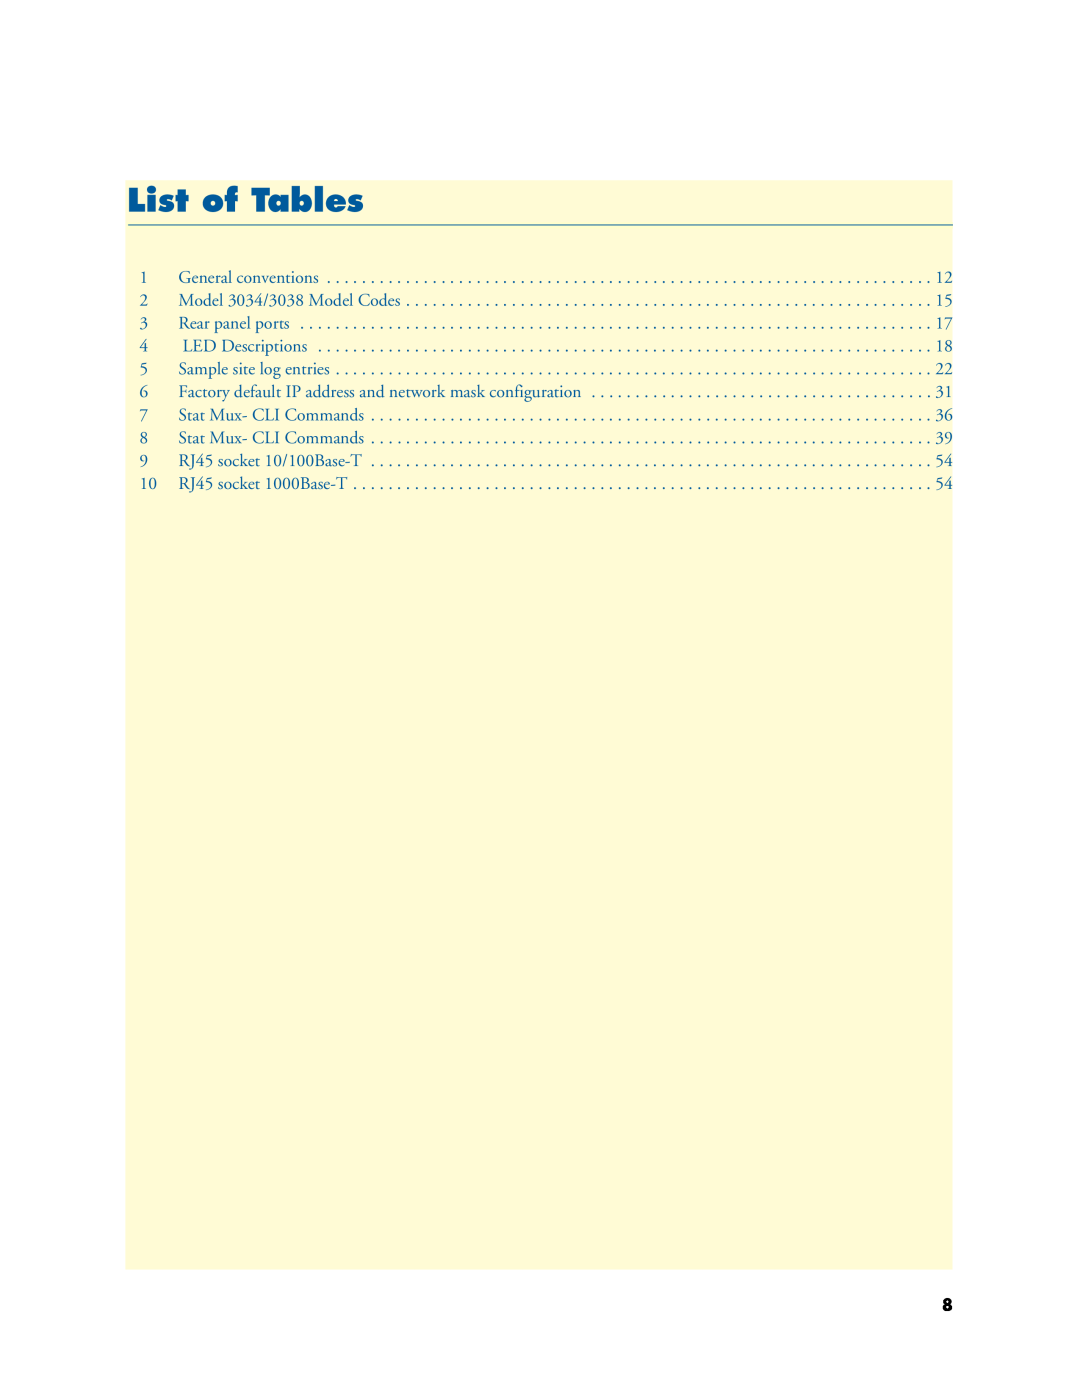 Patton electronic 3034/3038 manual List of Tables 